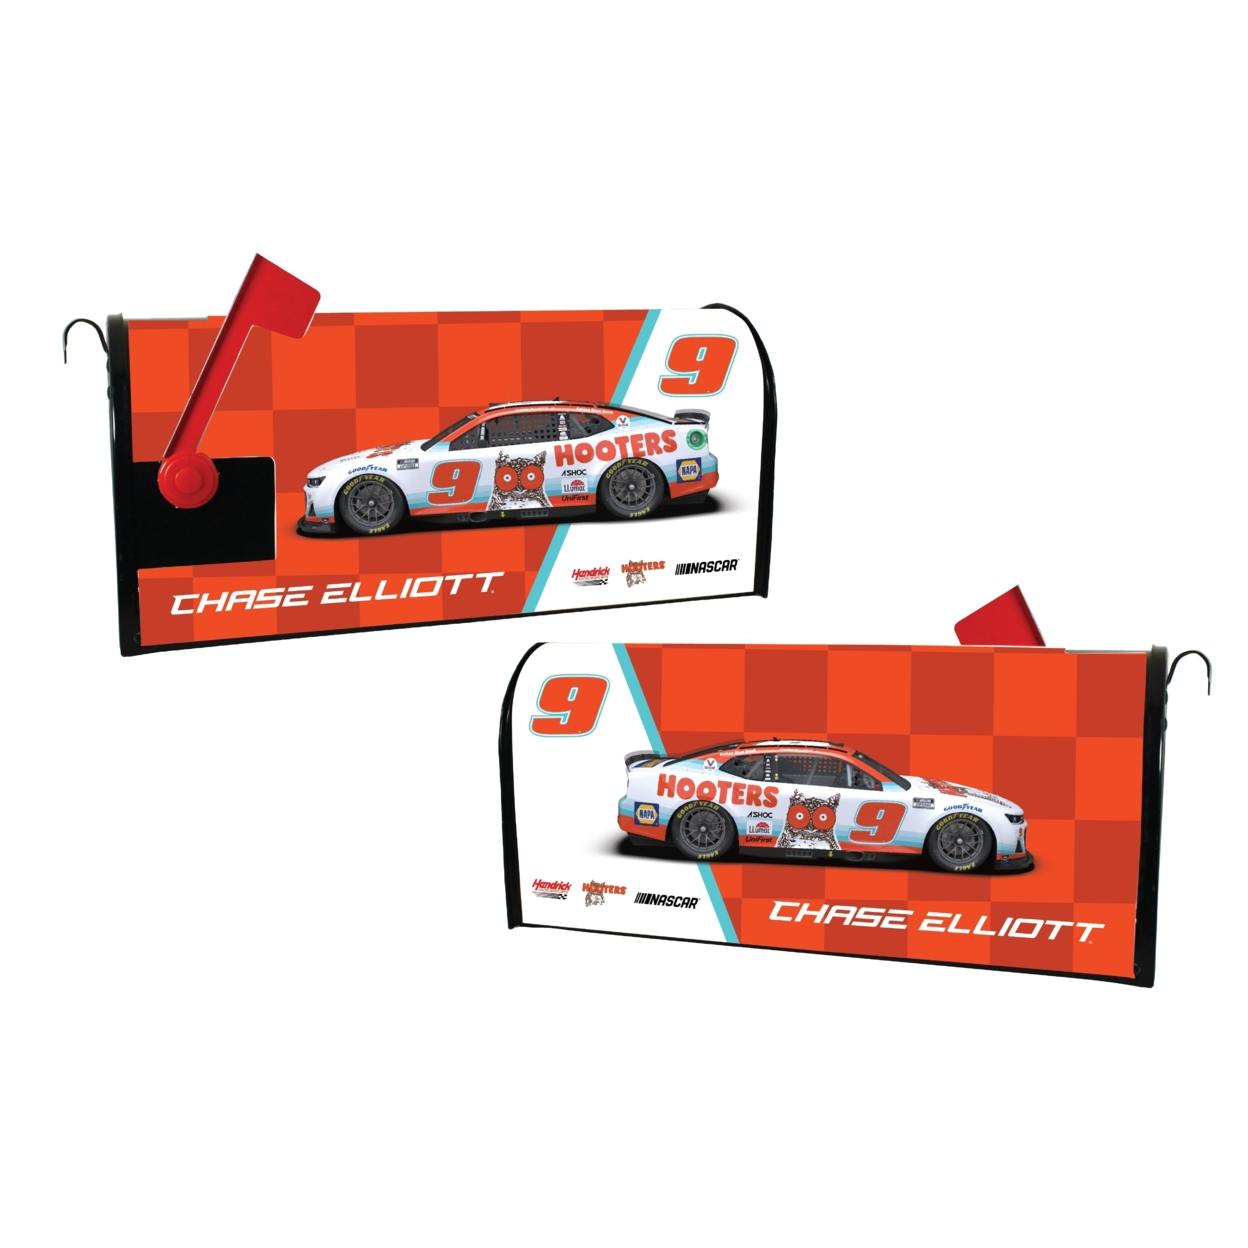 Nascar #9 Chase Elliott Hooters Mailbox Cover Car Design New For 2022